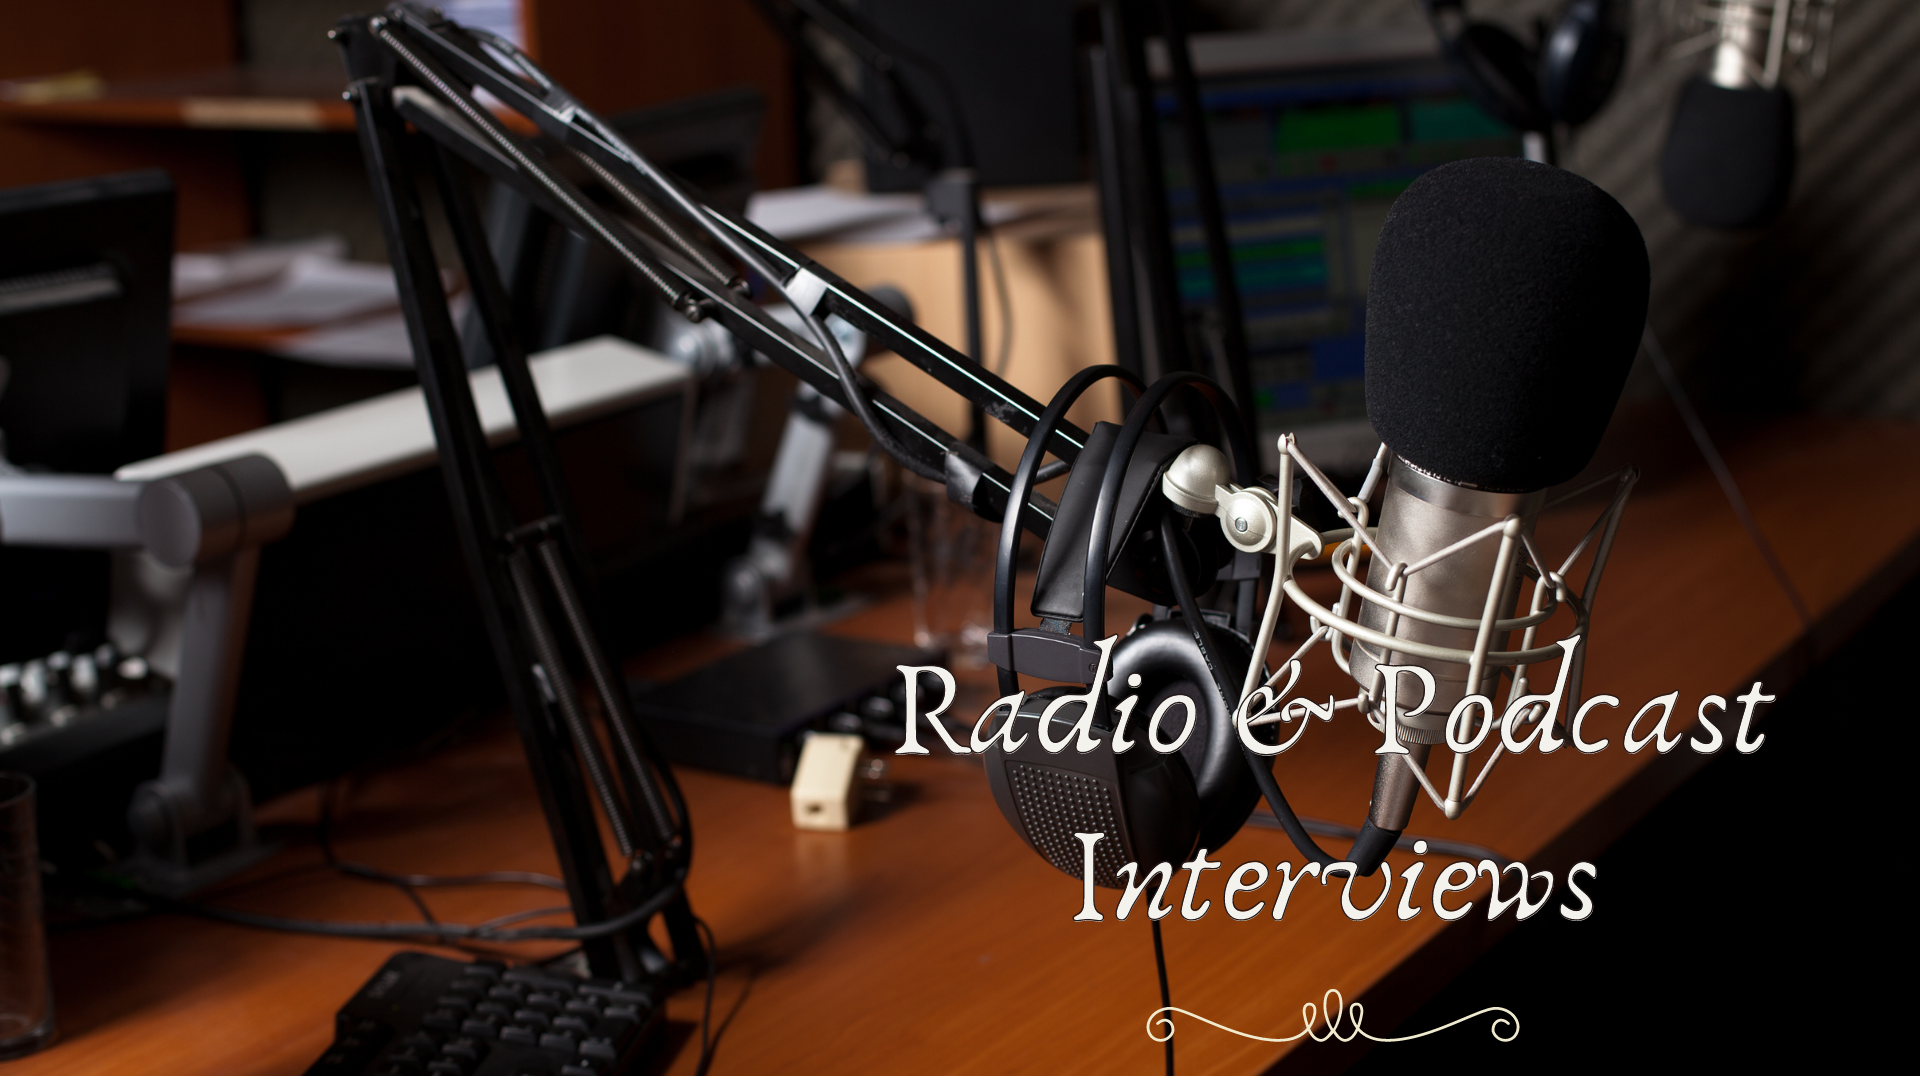 Radio microphone linked to radio and podcast interviews by Laura Baxter